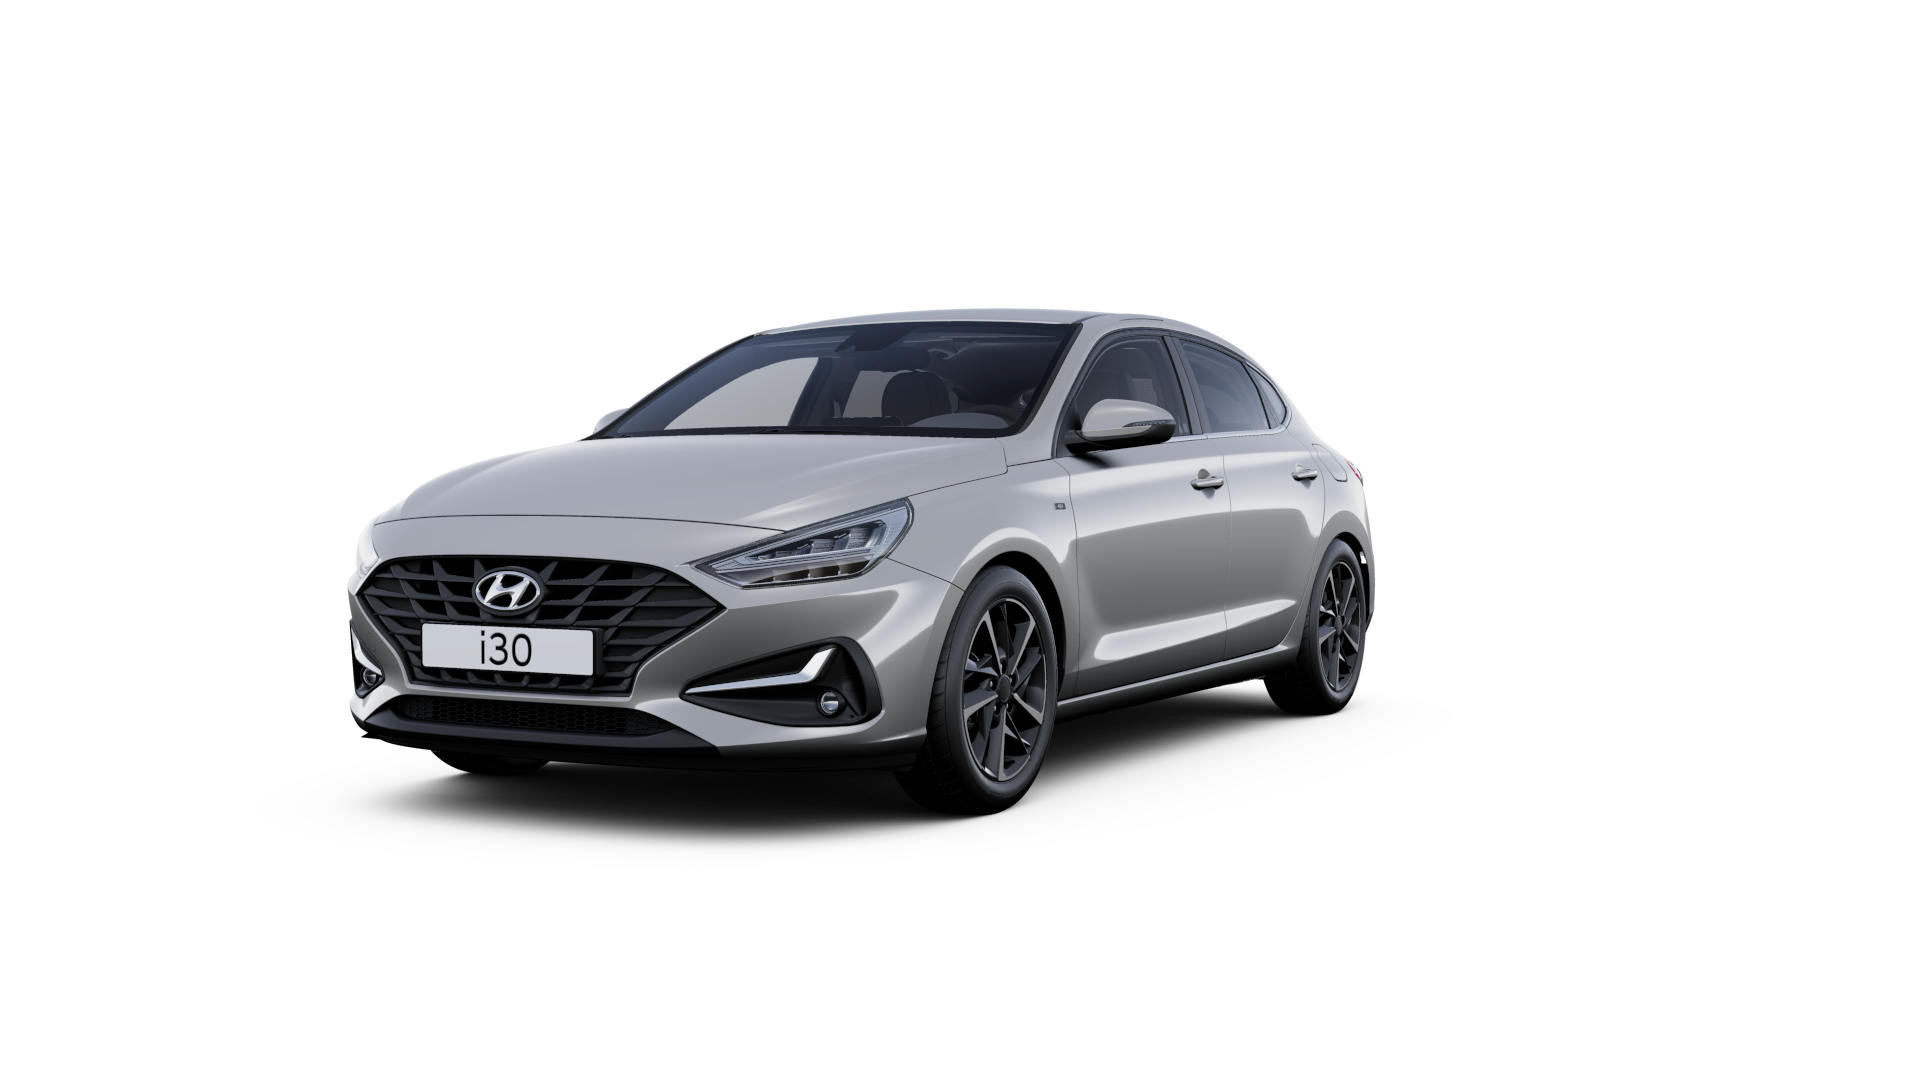 Front side view of the new Hyundai i30 Fastback in the colour Shimmering Silver.